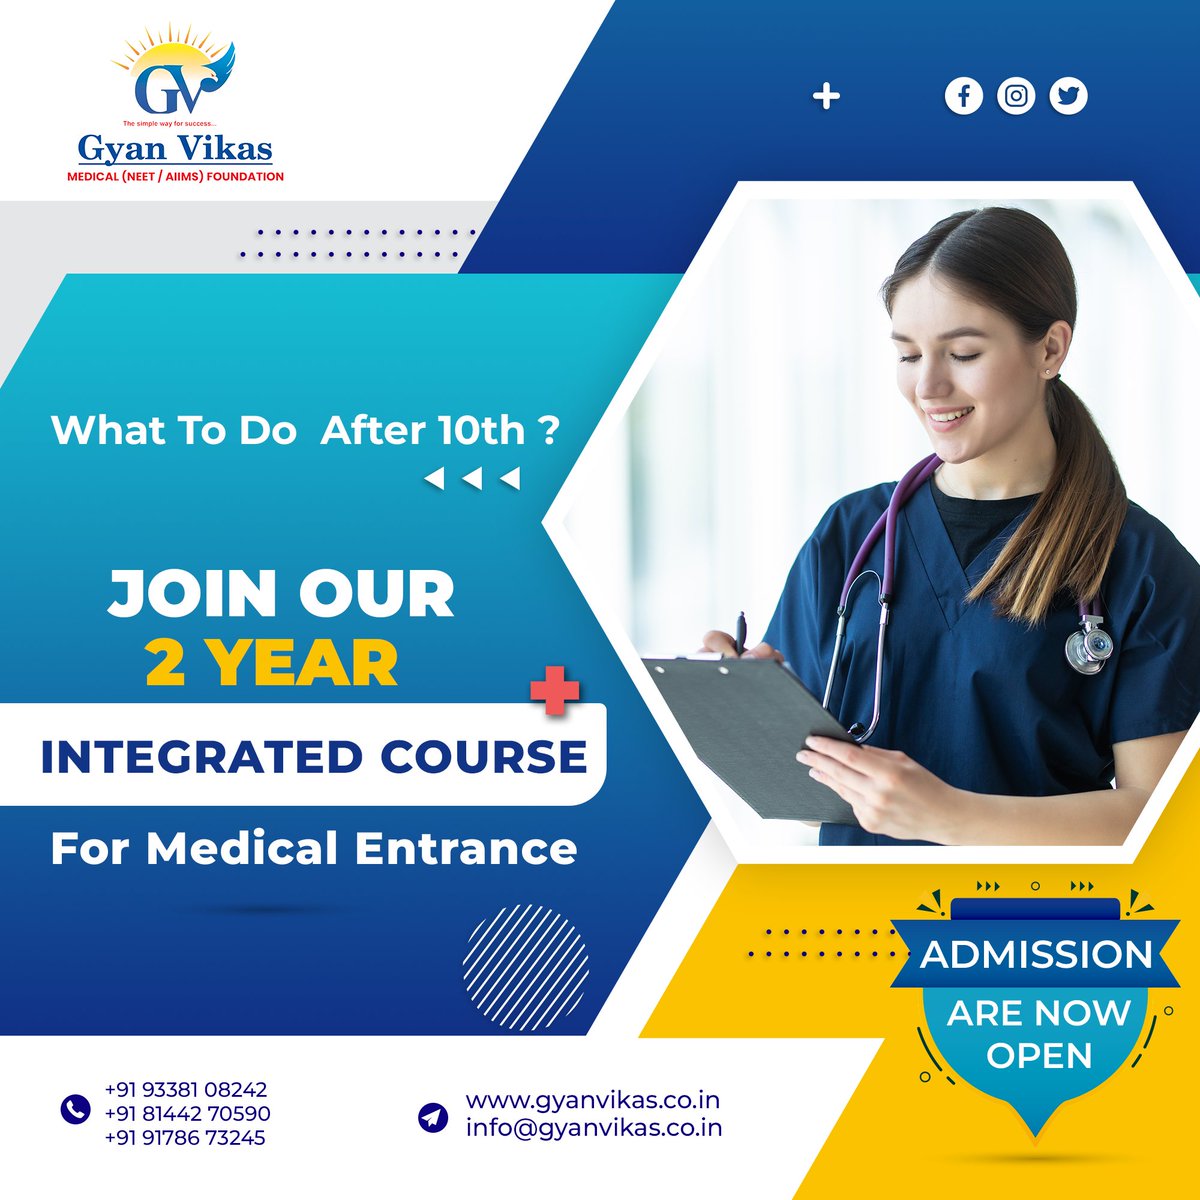 The road to NEET success starts with Gyan Vikas. Enroll in our 2-year integrated program and get the training you need to reach your goals.

Limited Seats Available! Hurry up!

#GyanVikas #Neet #coachingInstitute